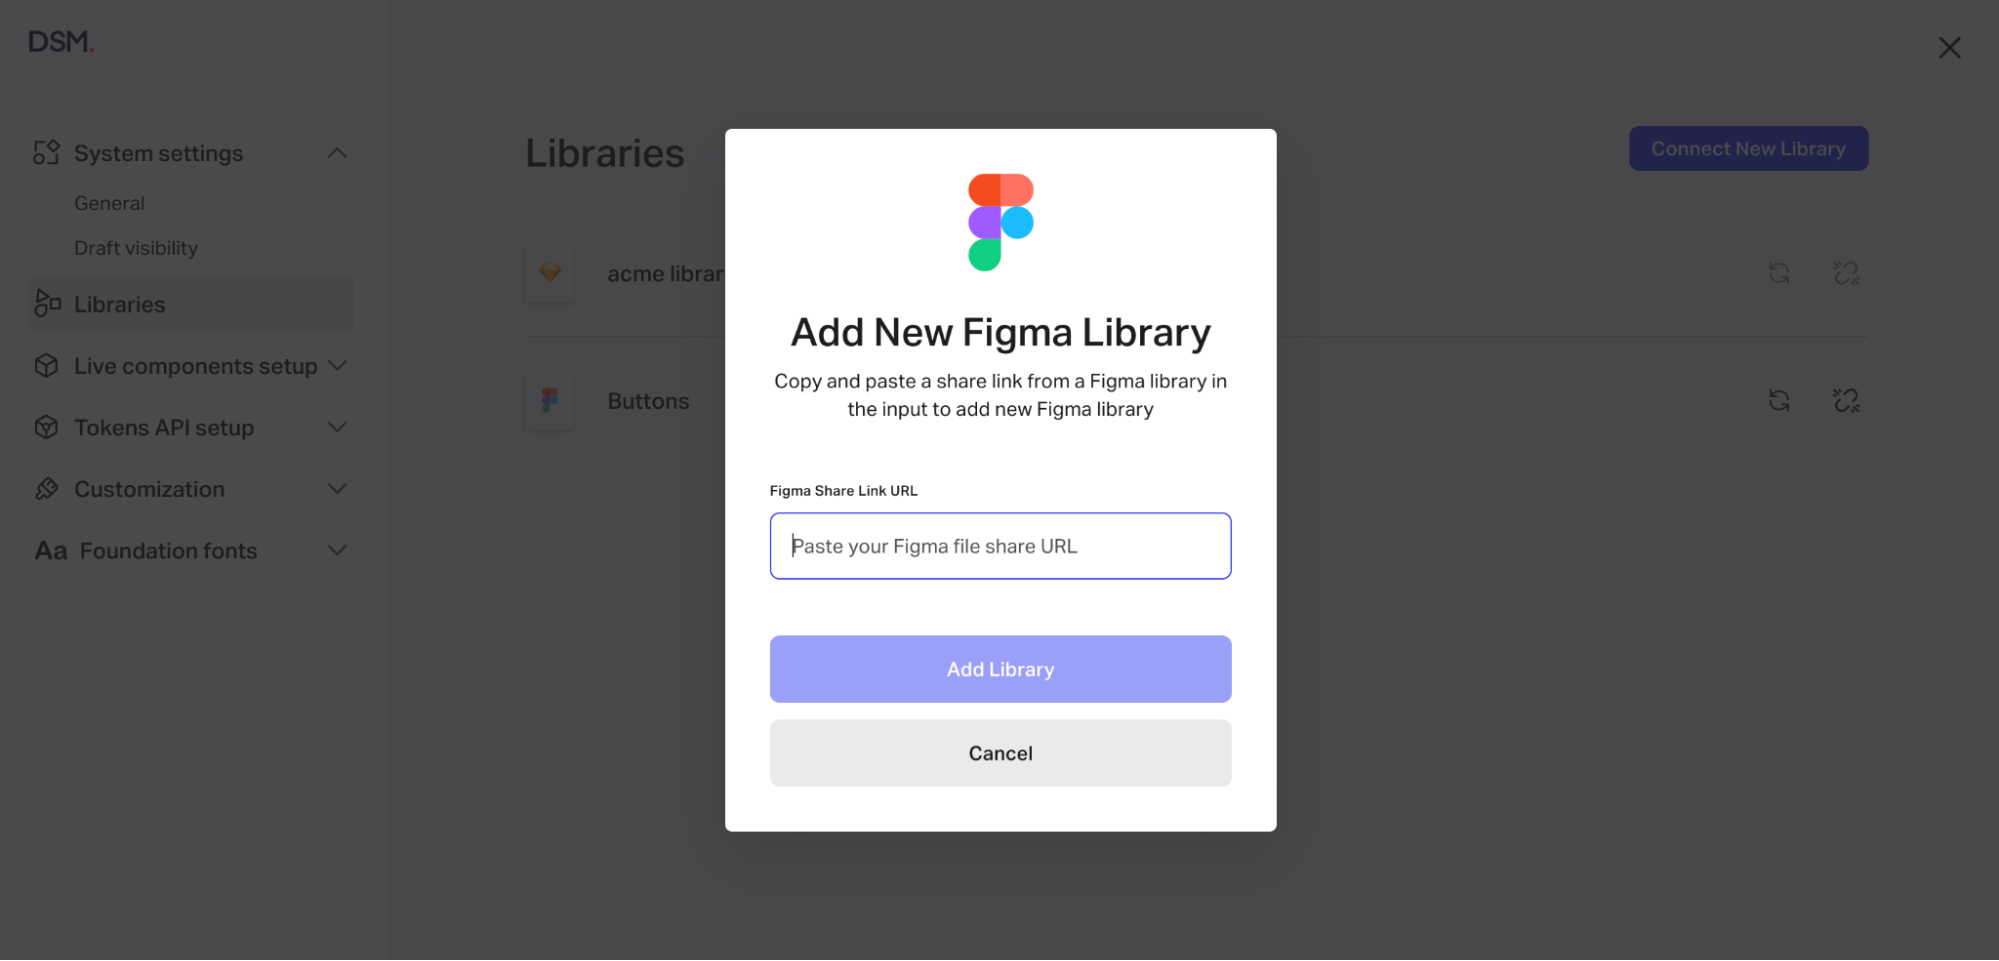 invision-dsm-add-new-figma-library.png